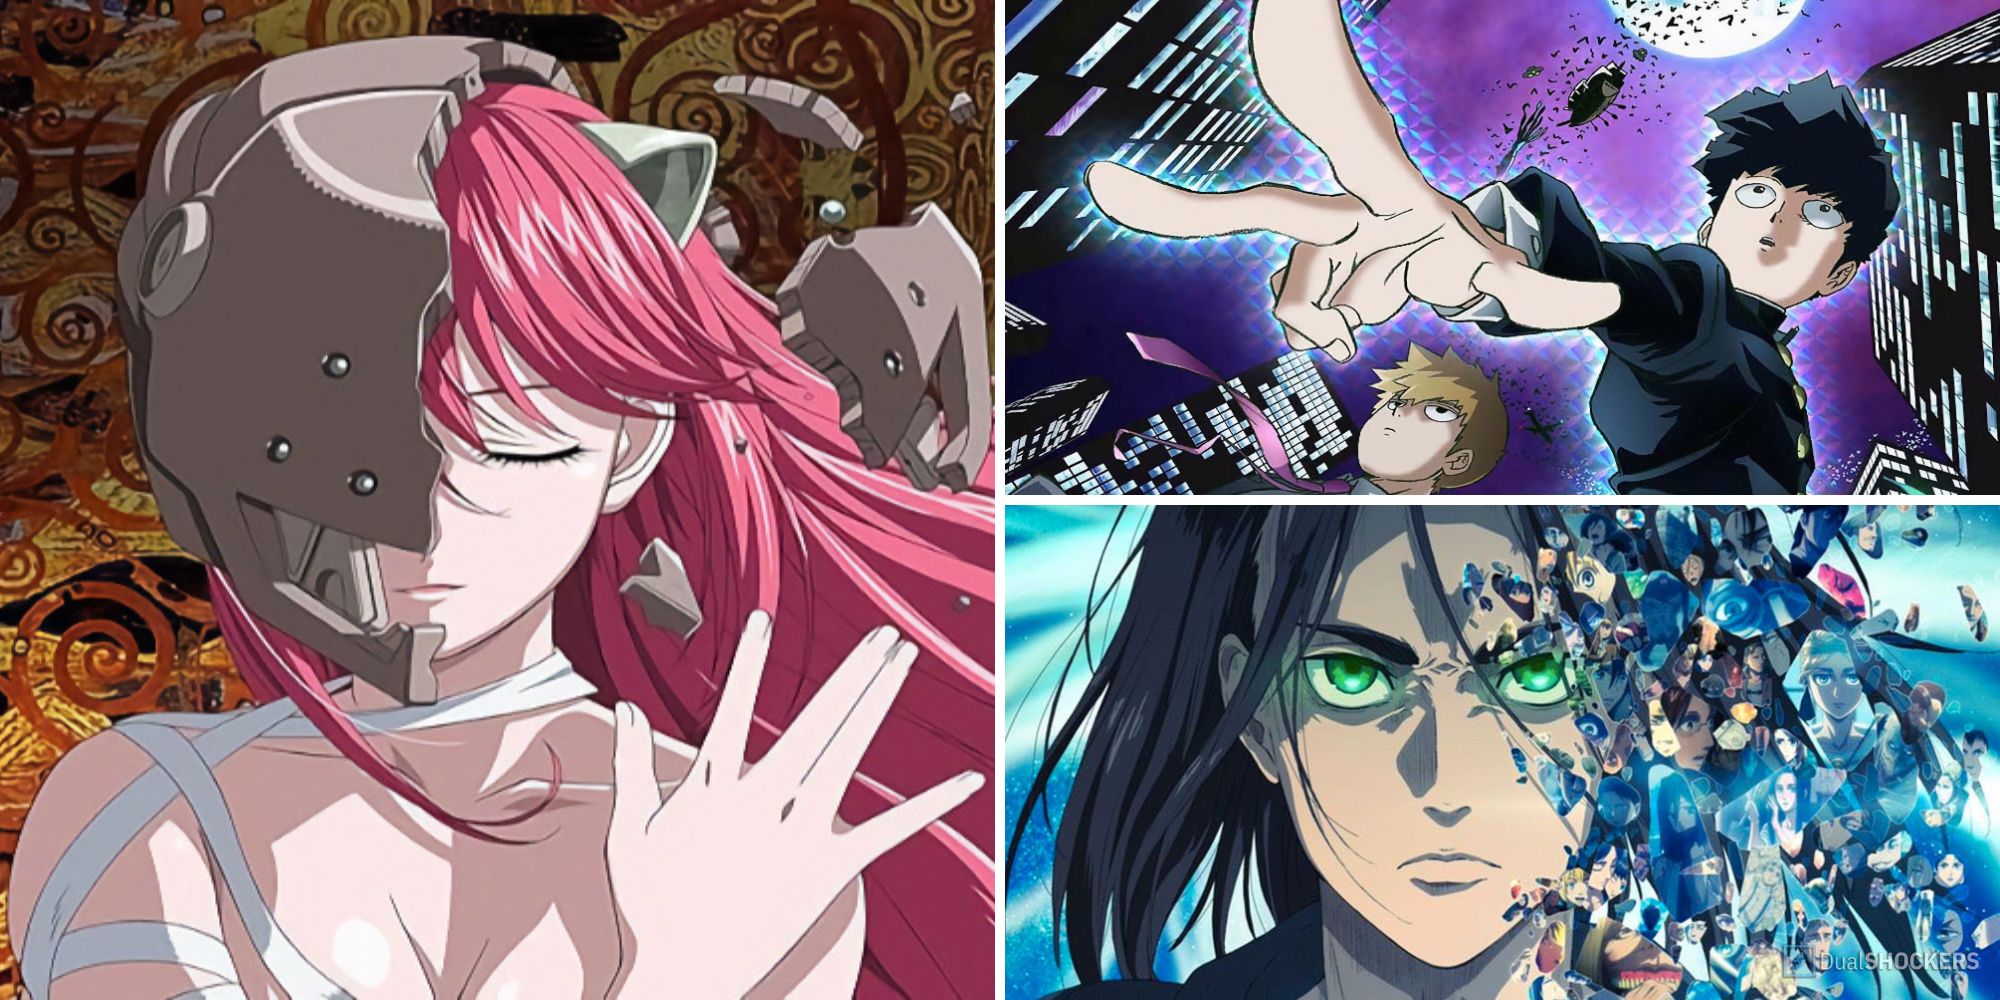 Elfen Lied (Left), Mob Psycho 100 (Top right), and Attack on Titan (Bottom Right)